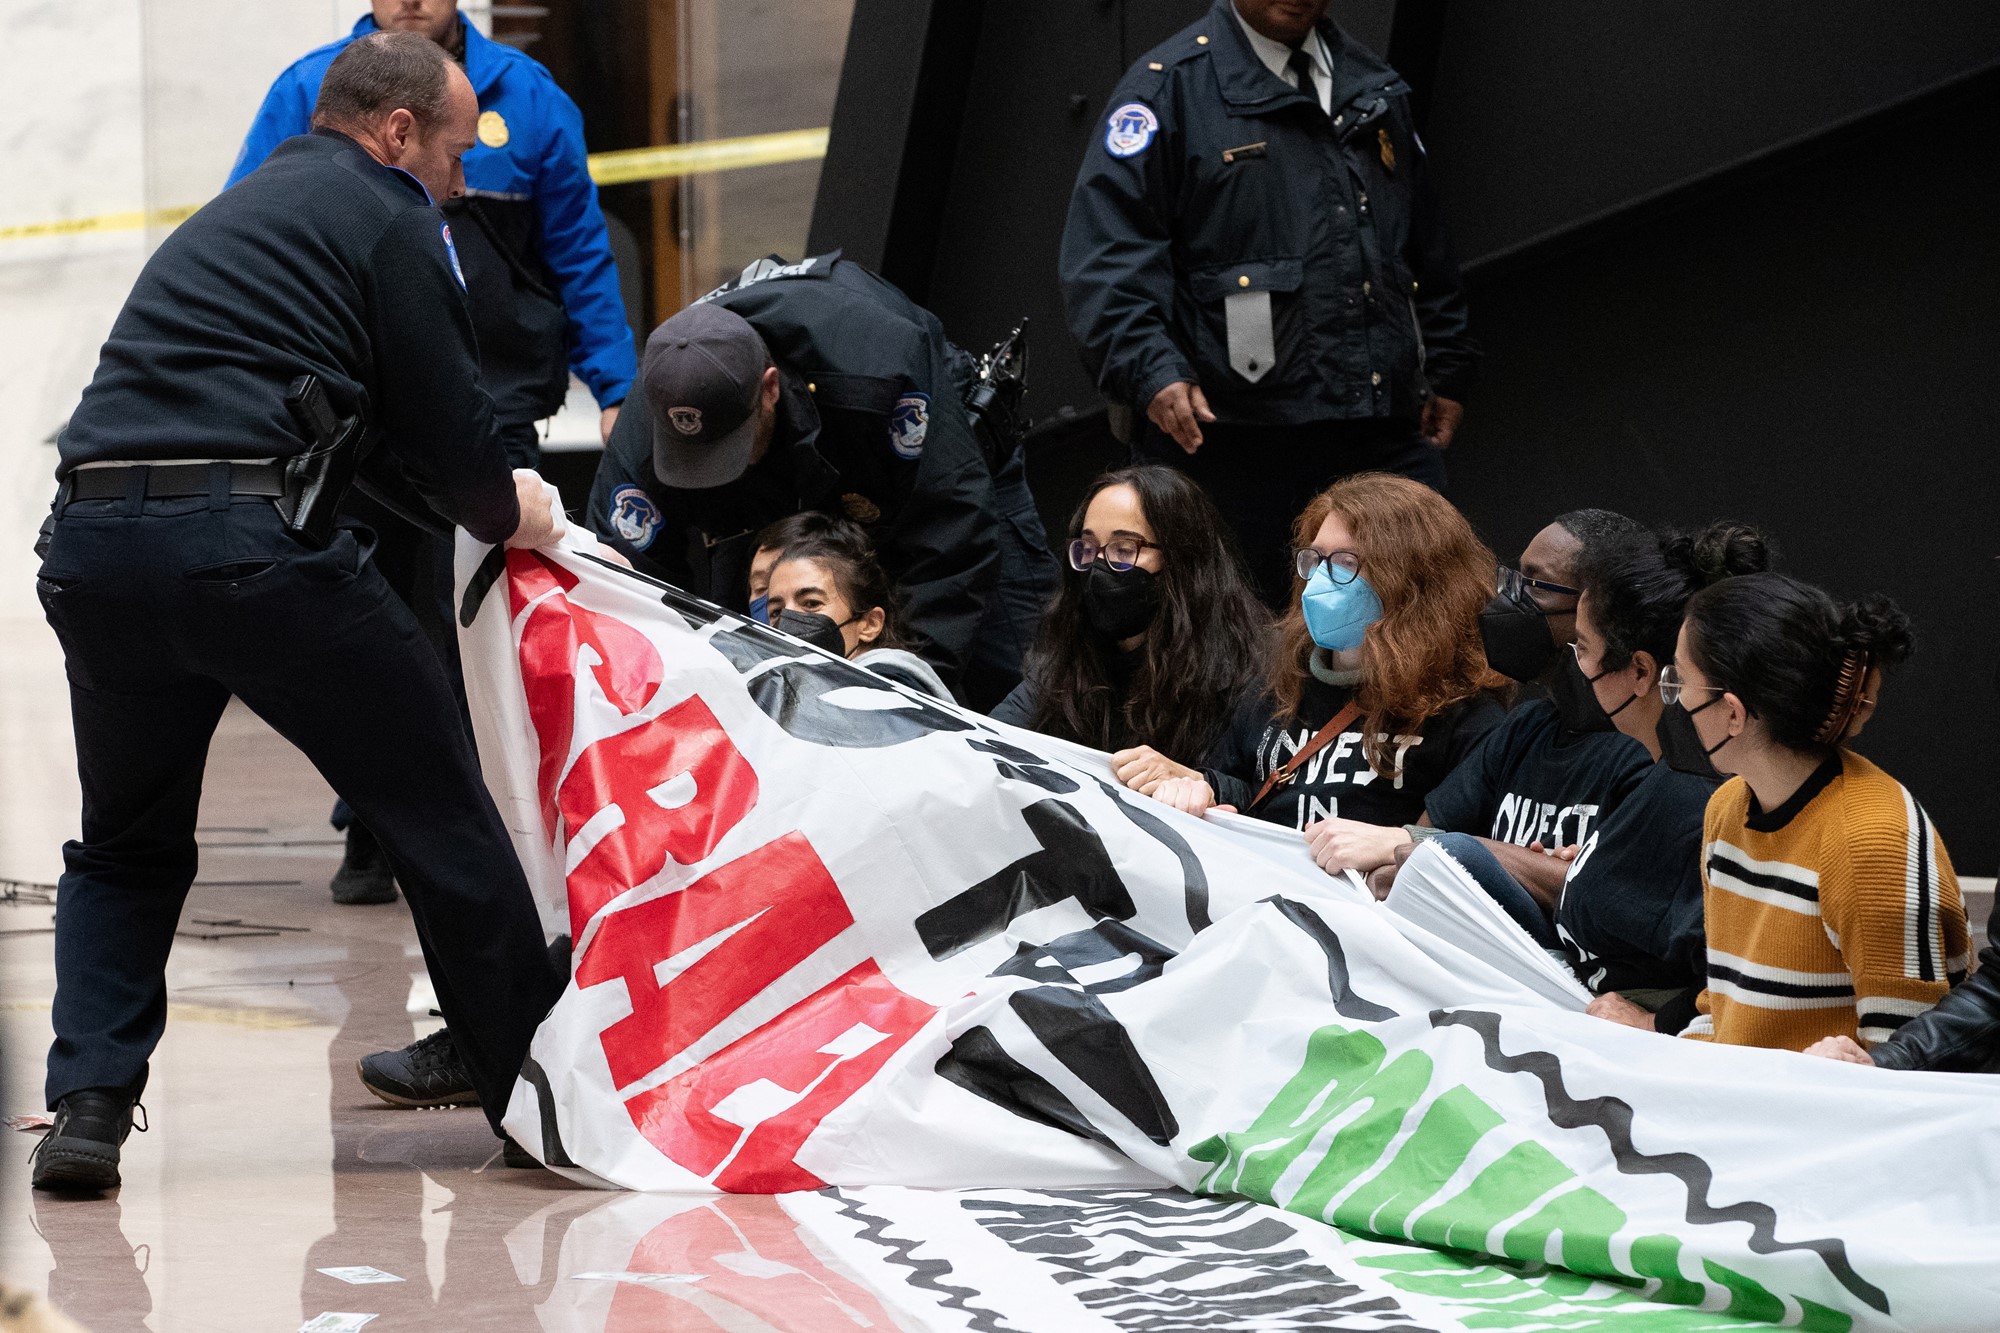 Police pull banner from activists sitting on the ground